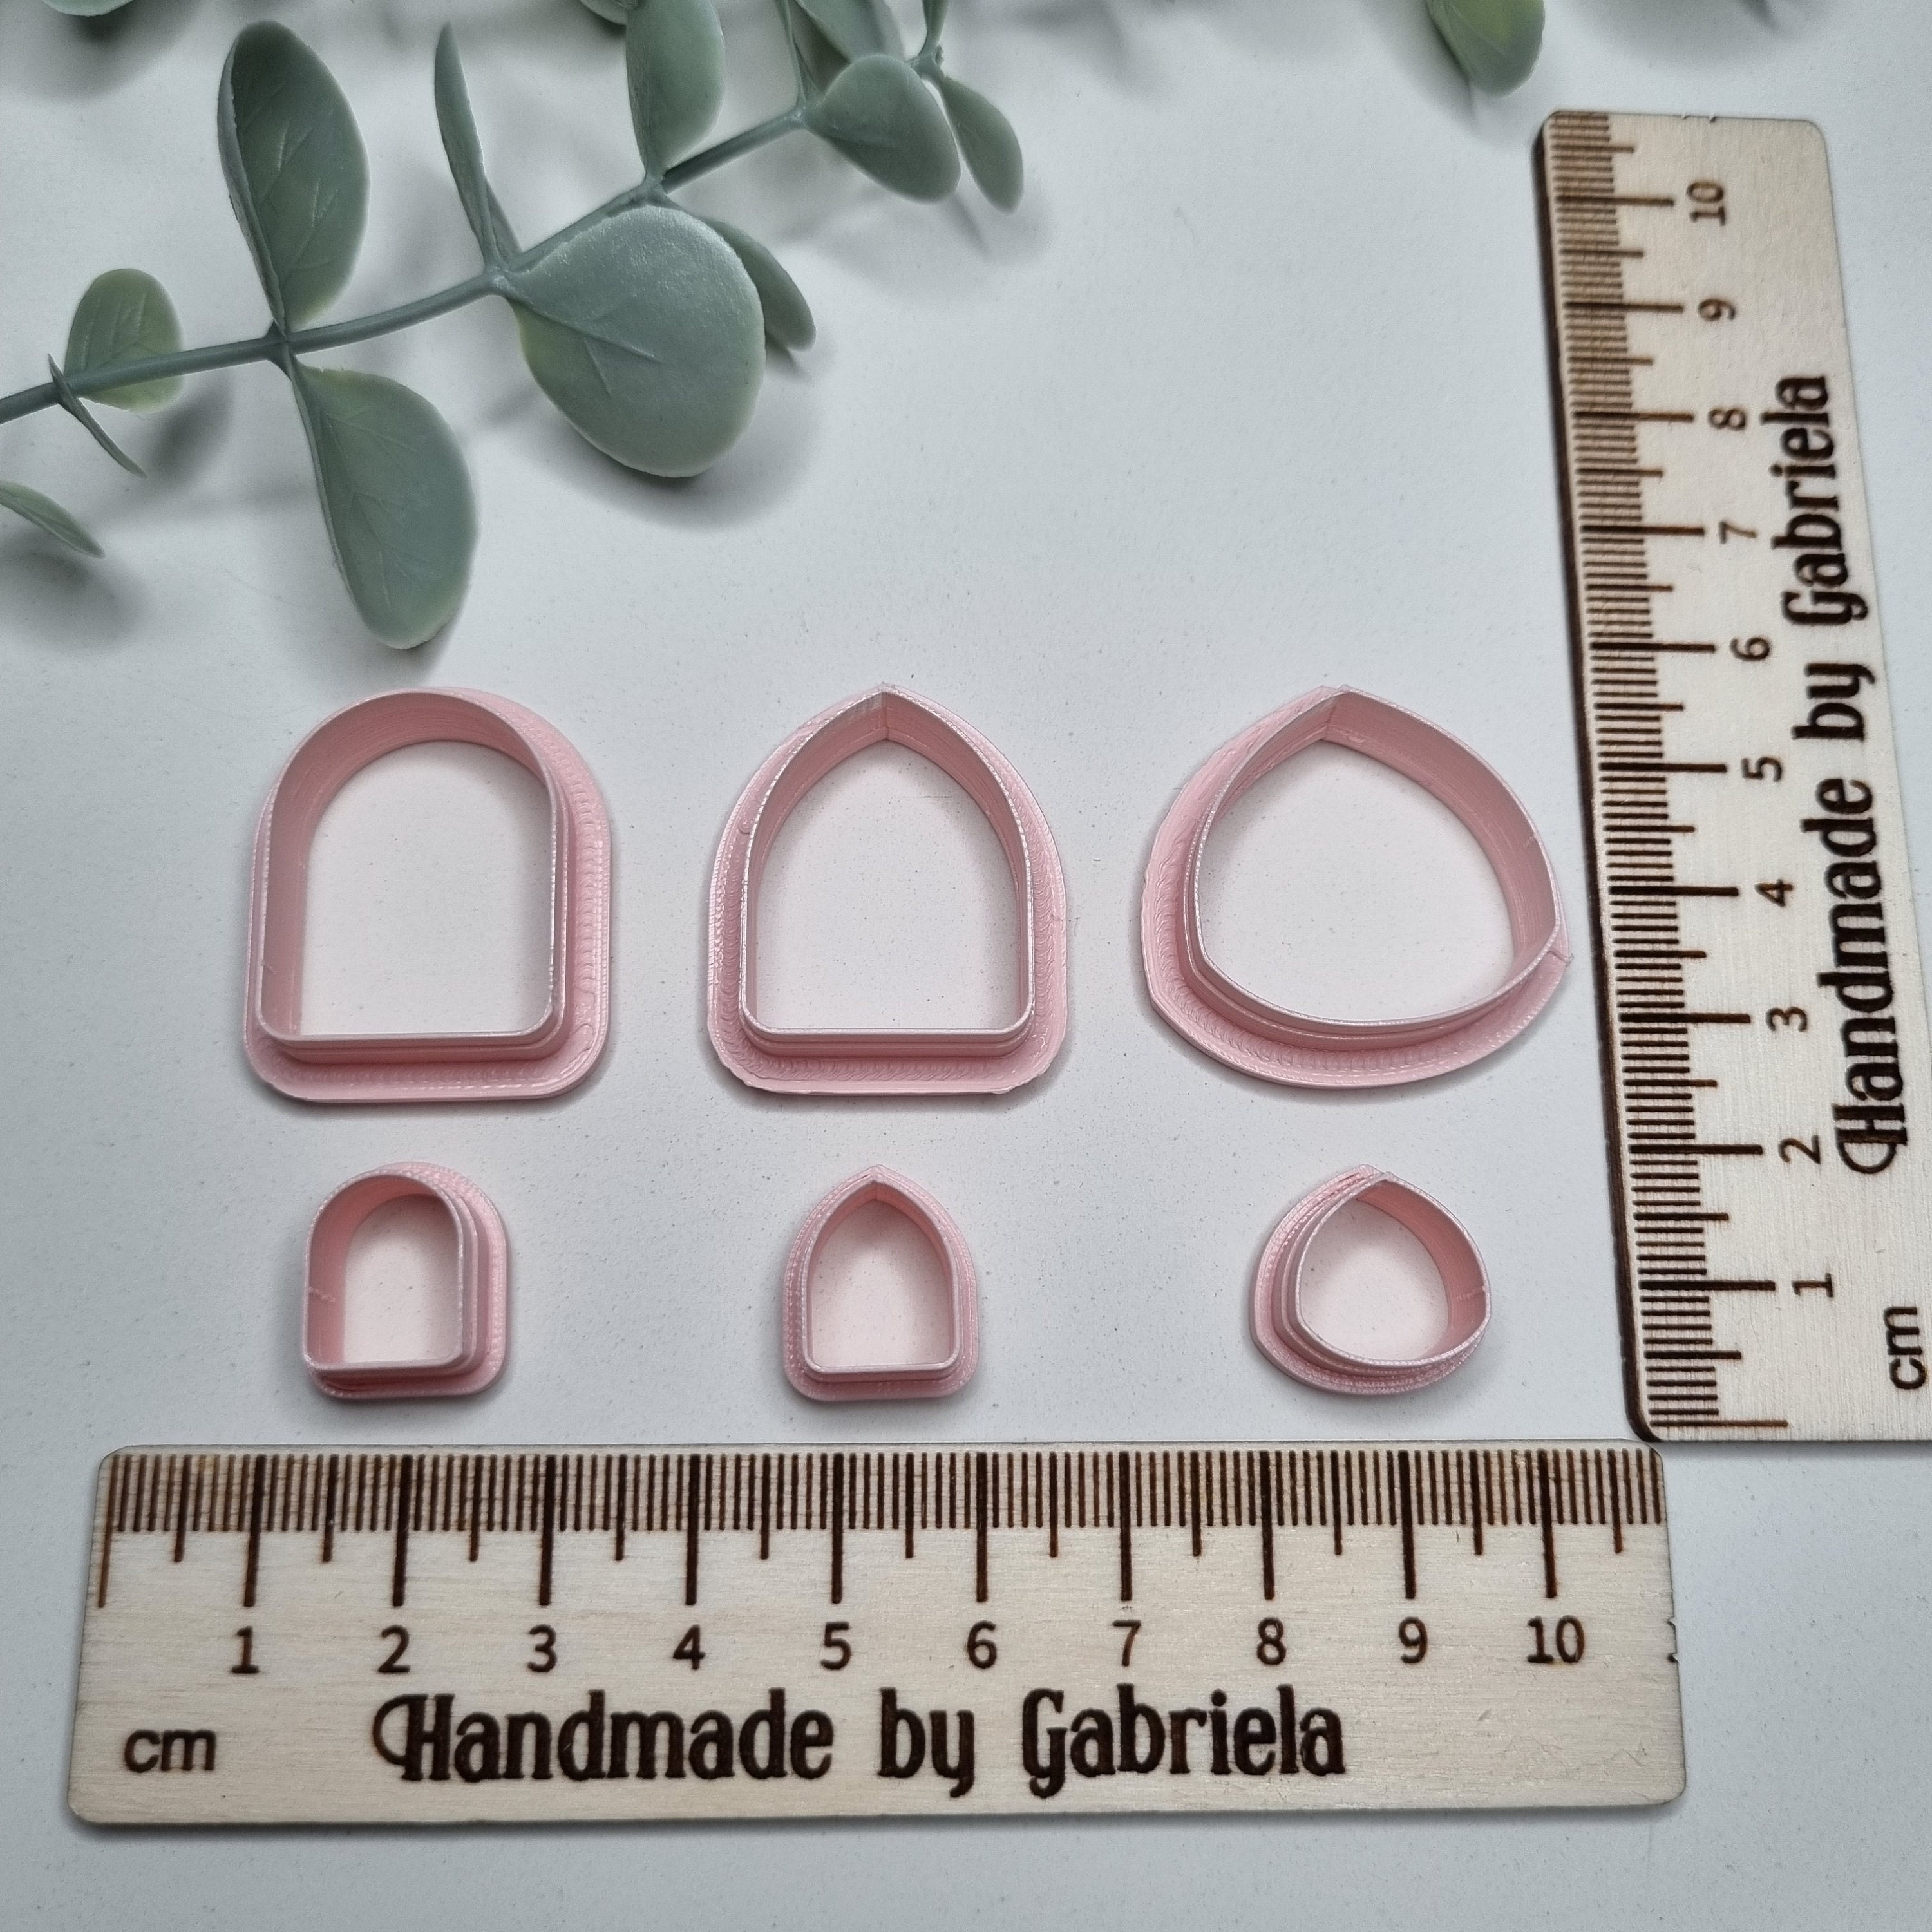 Polymer Clay Accessories Tools 